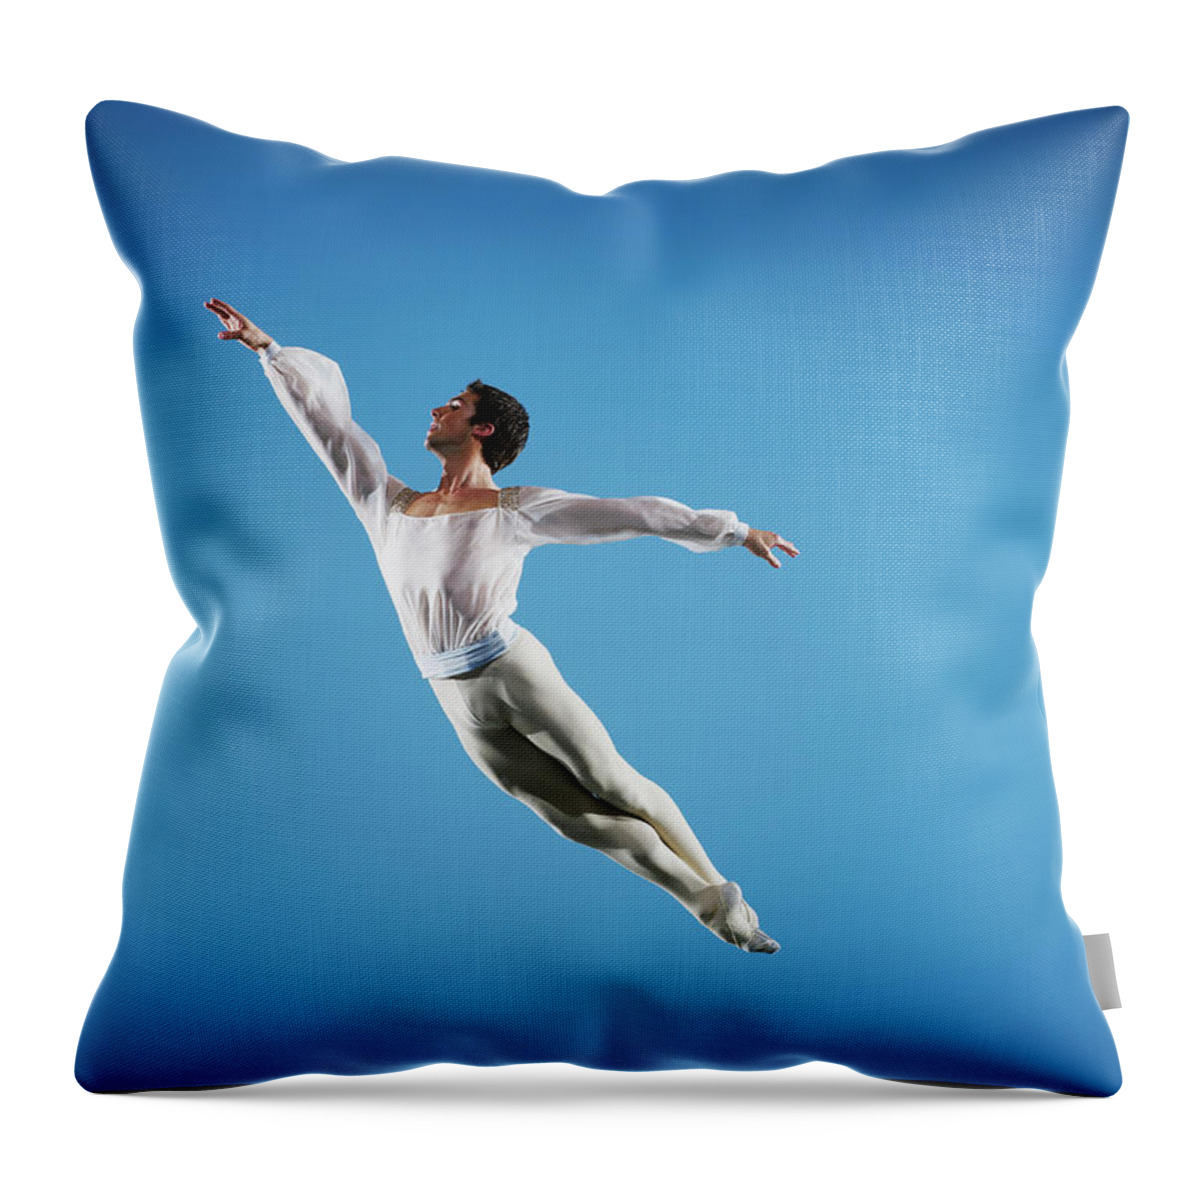 Ballet Dancer Throw Pillow featuring the photograph Male Ballet Dancer Leaping On Stage #1 by Thomas Barwick